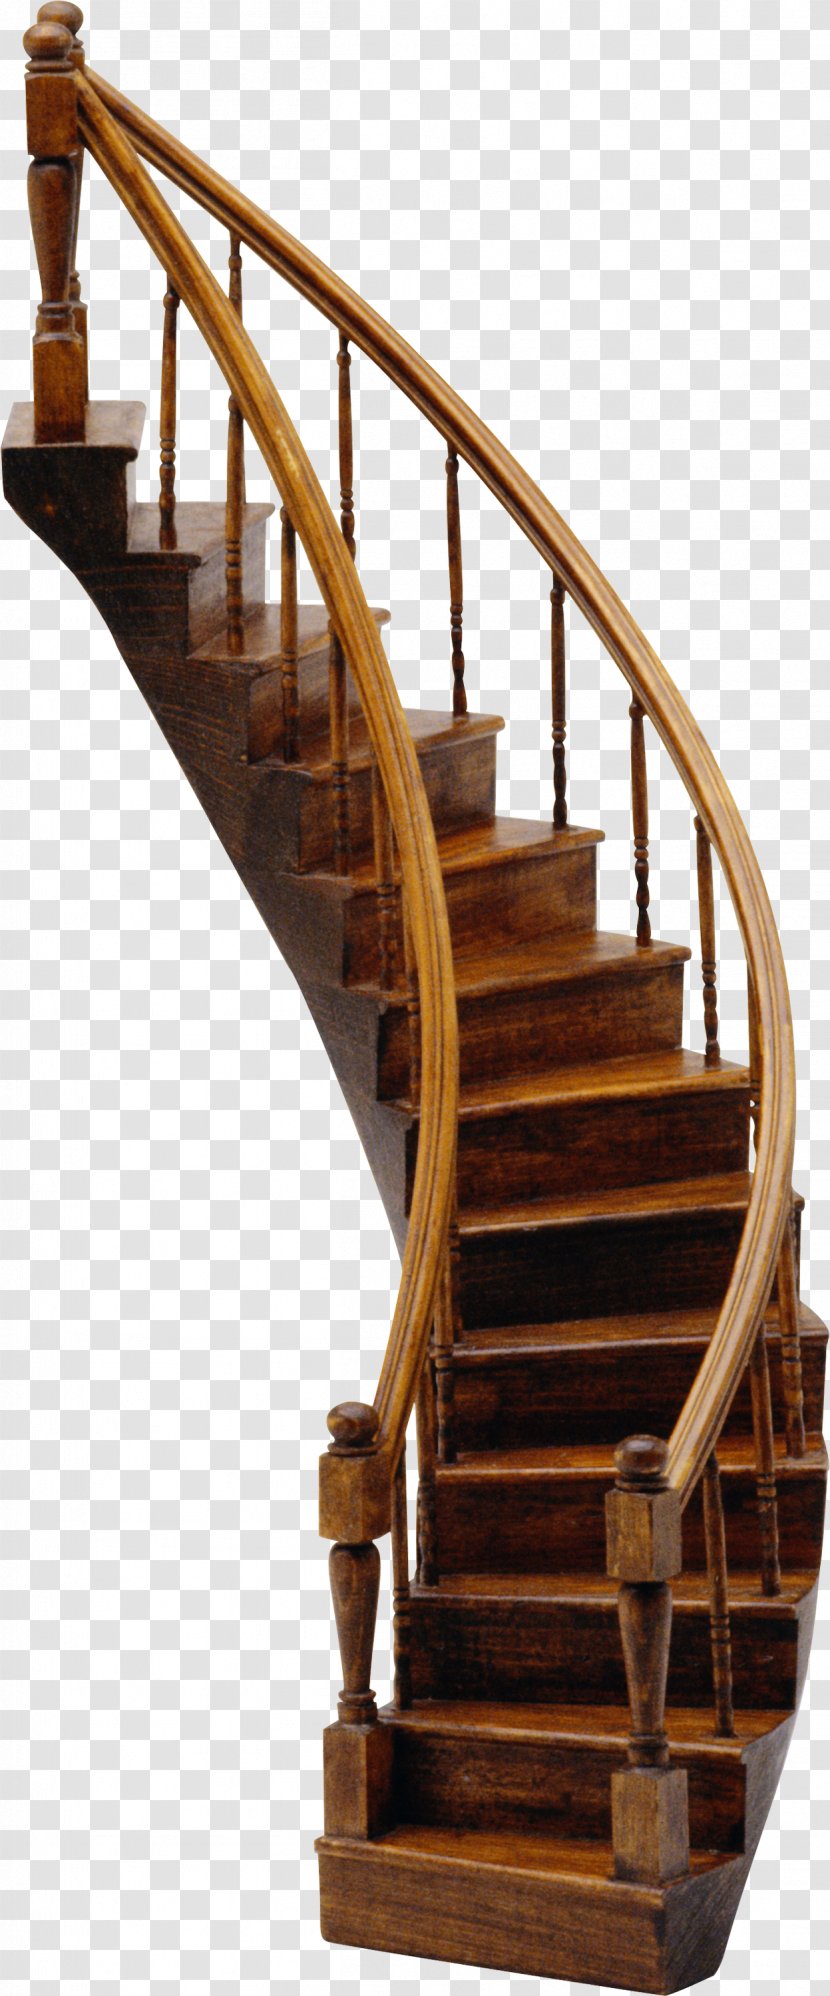 Stairs - Ladder Transparent PNG